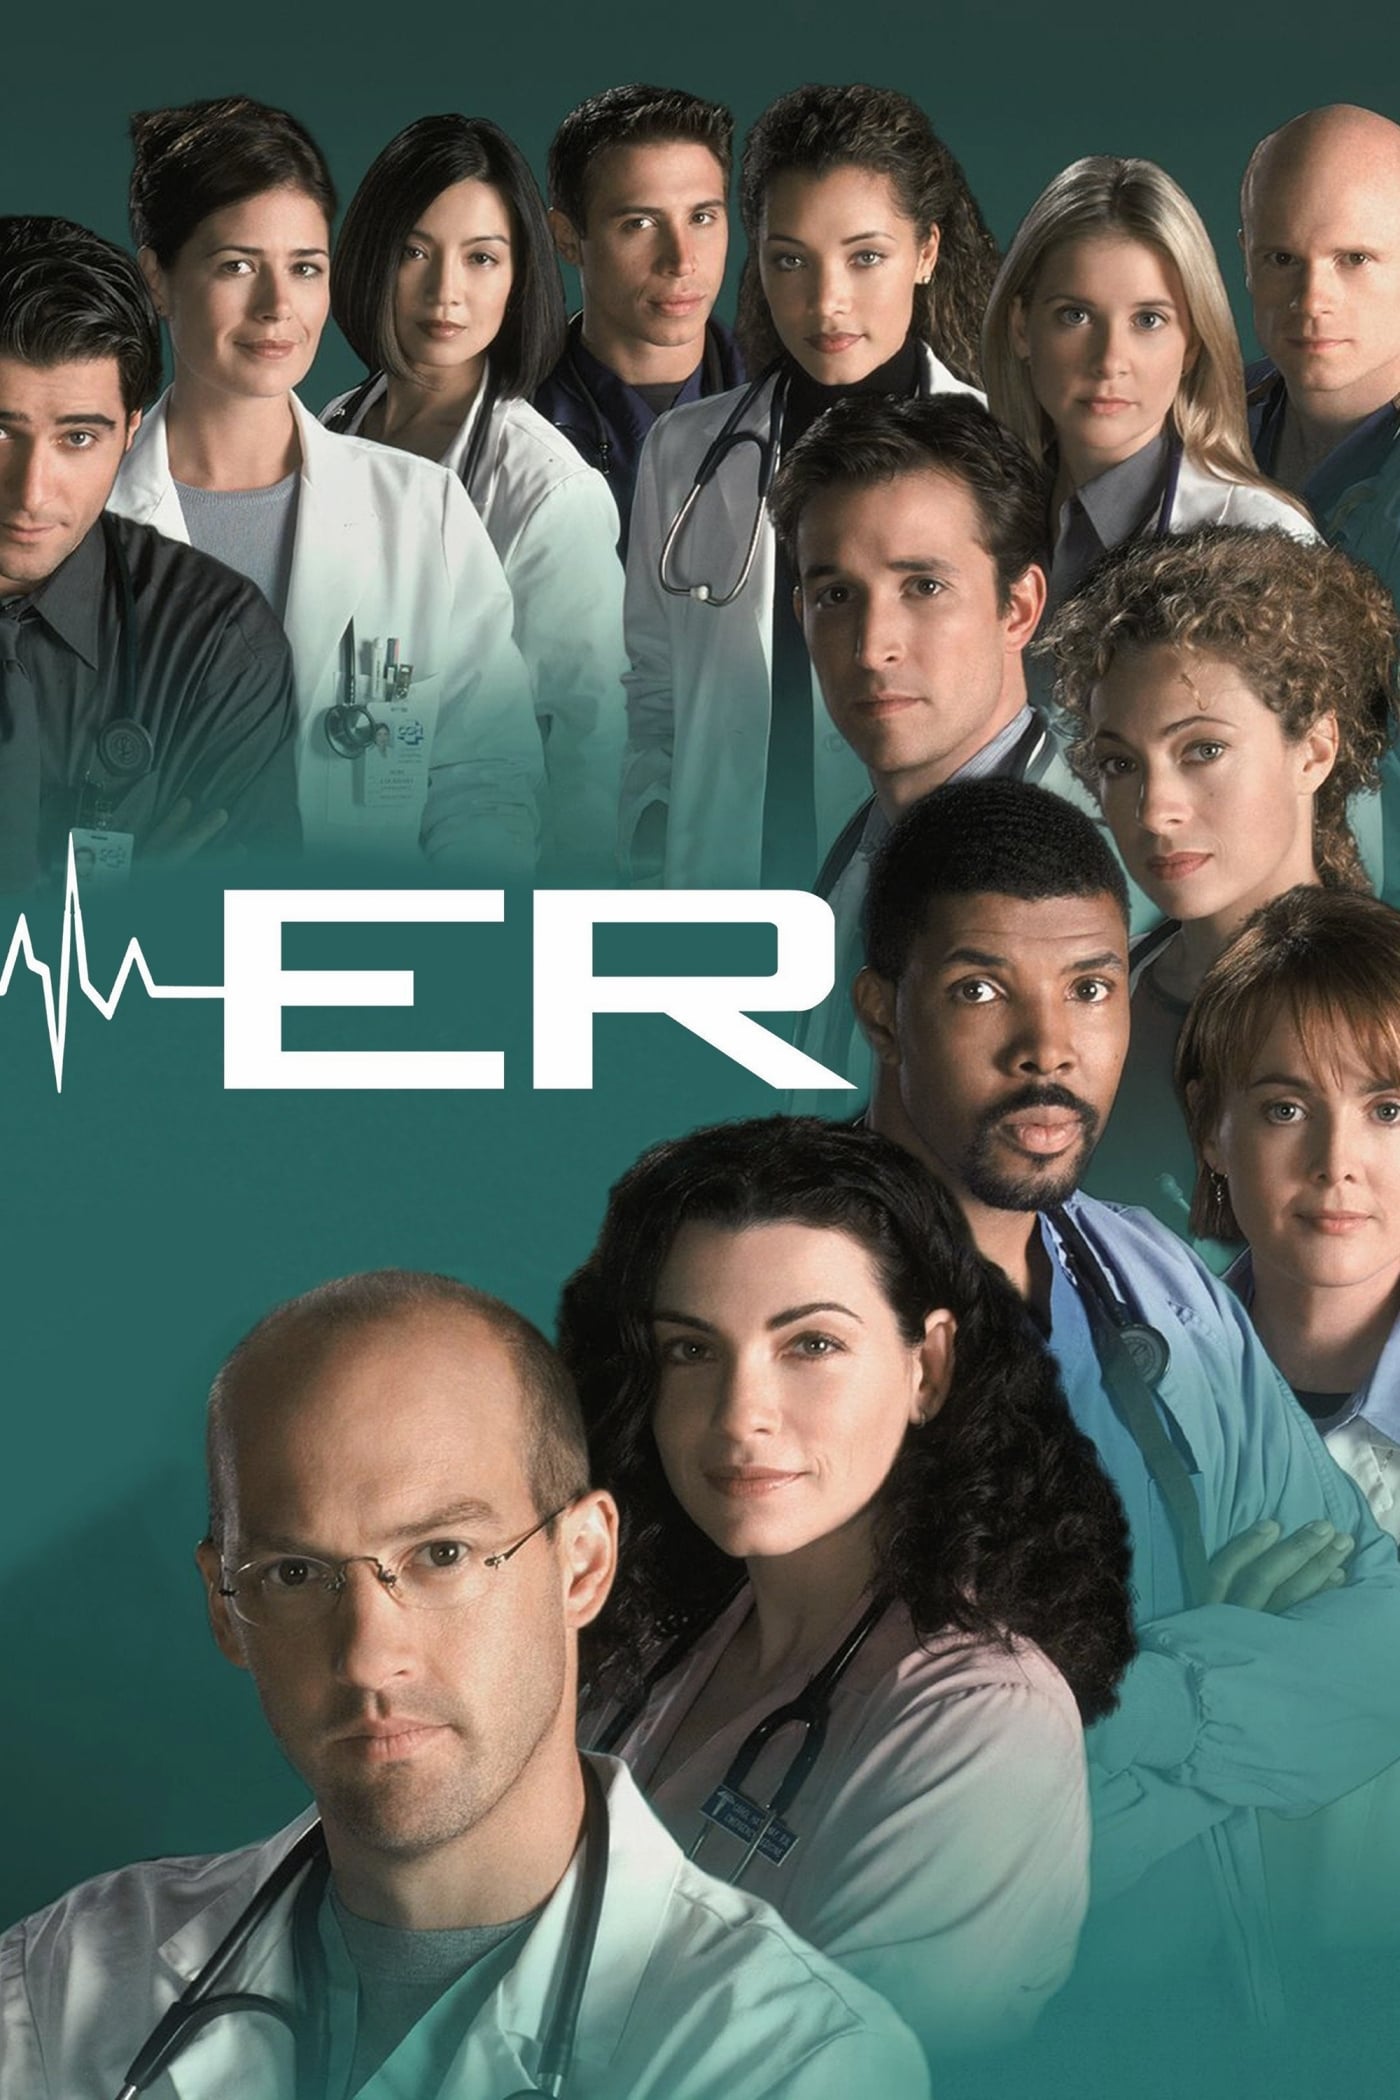 ER TV Shows About Emergency Room